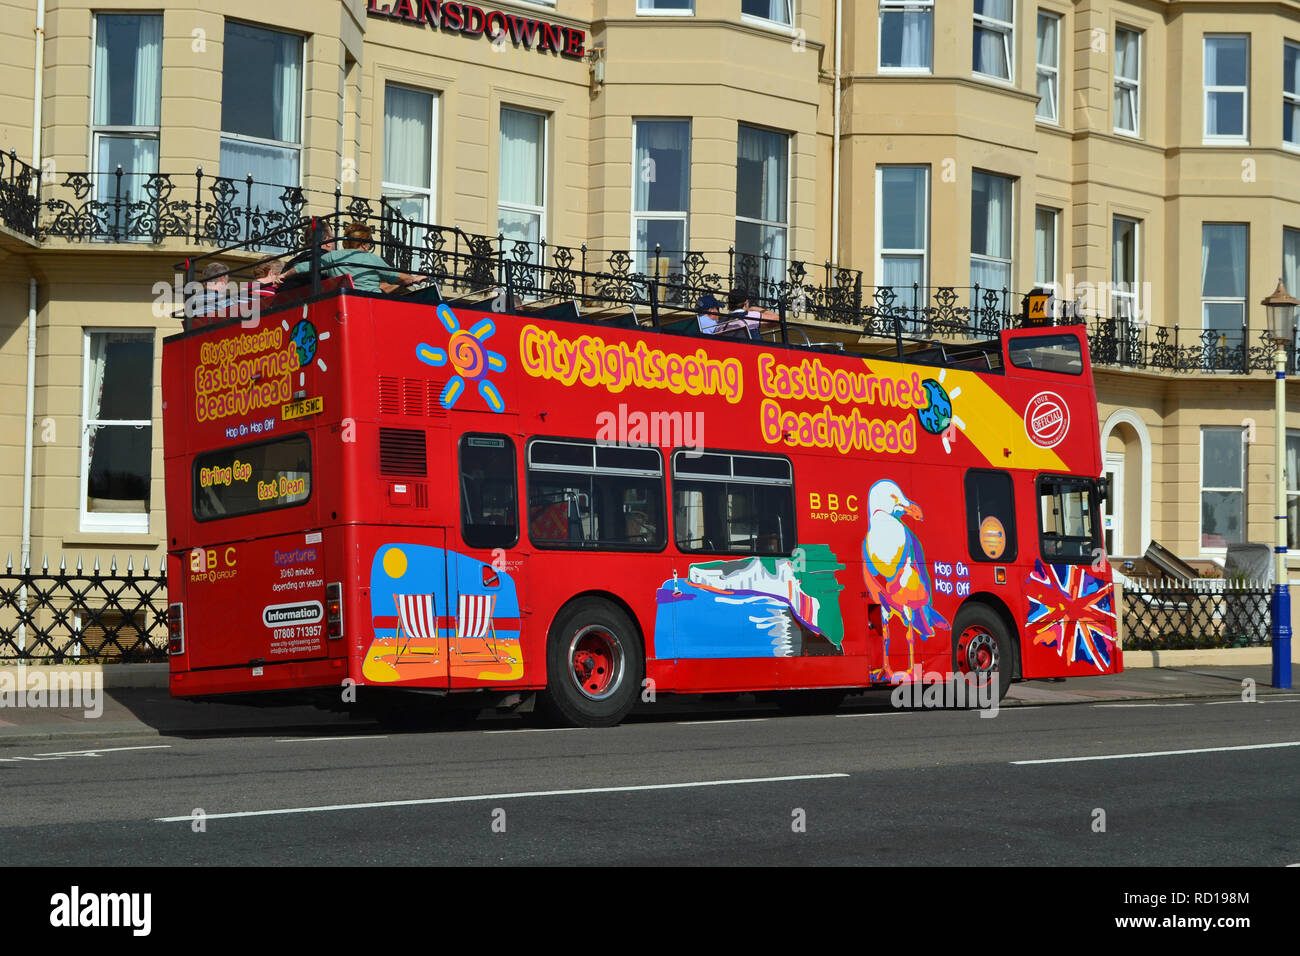 Eastbourne City Sightseeing Bus outside the Lansdowne Hotel, Eastbourne Seafront, UK Stock Photo